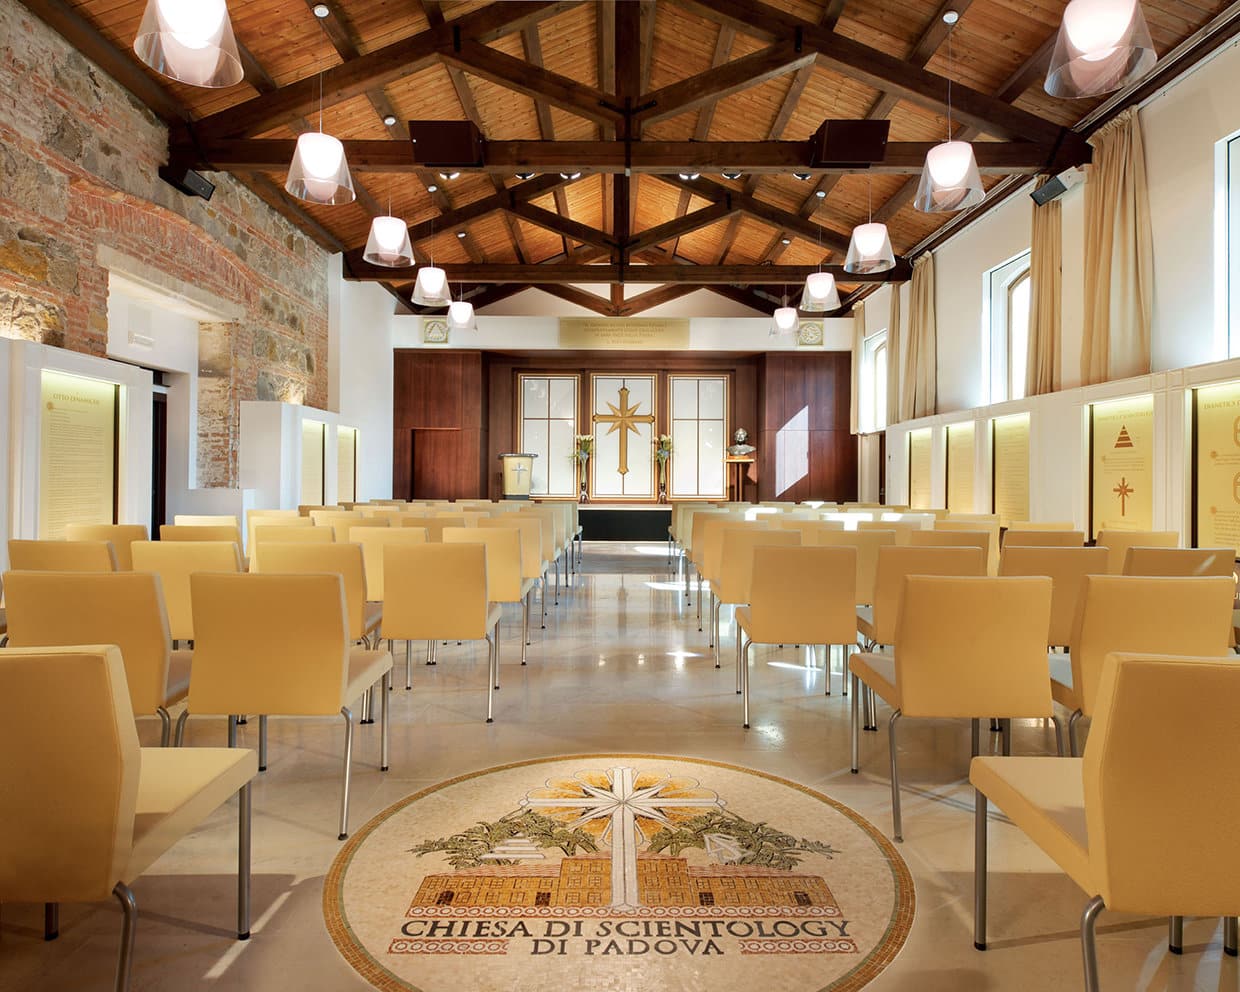 The Church of Scientology Padova is featured in a new episode of Destination: Scientology on the Scientology Network.